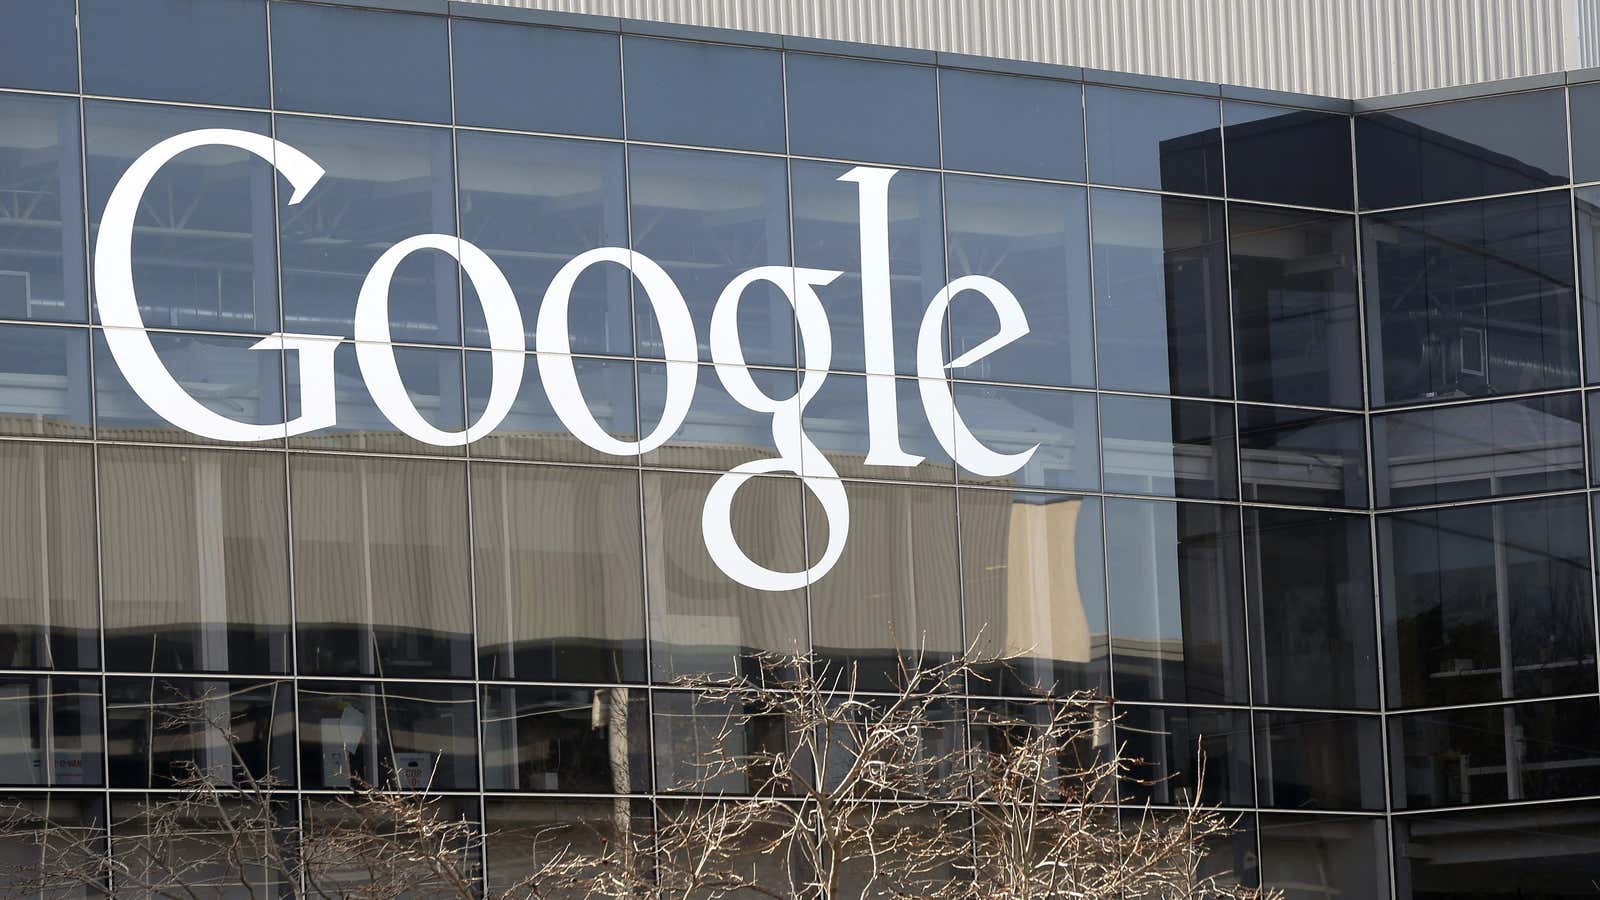 FILE – This Jan. 3, 2013, file photo shows a Google sign at the company’s headquarters in Mountain View, Calif. When it comes to the…